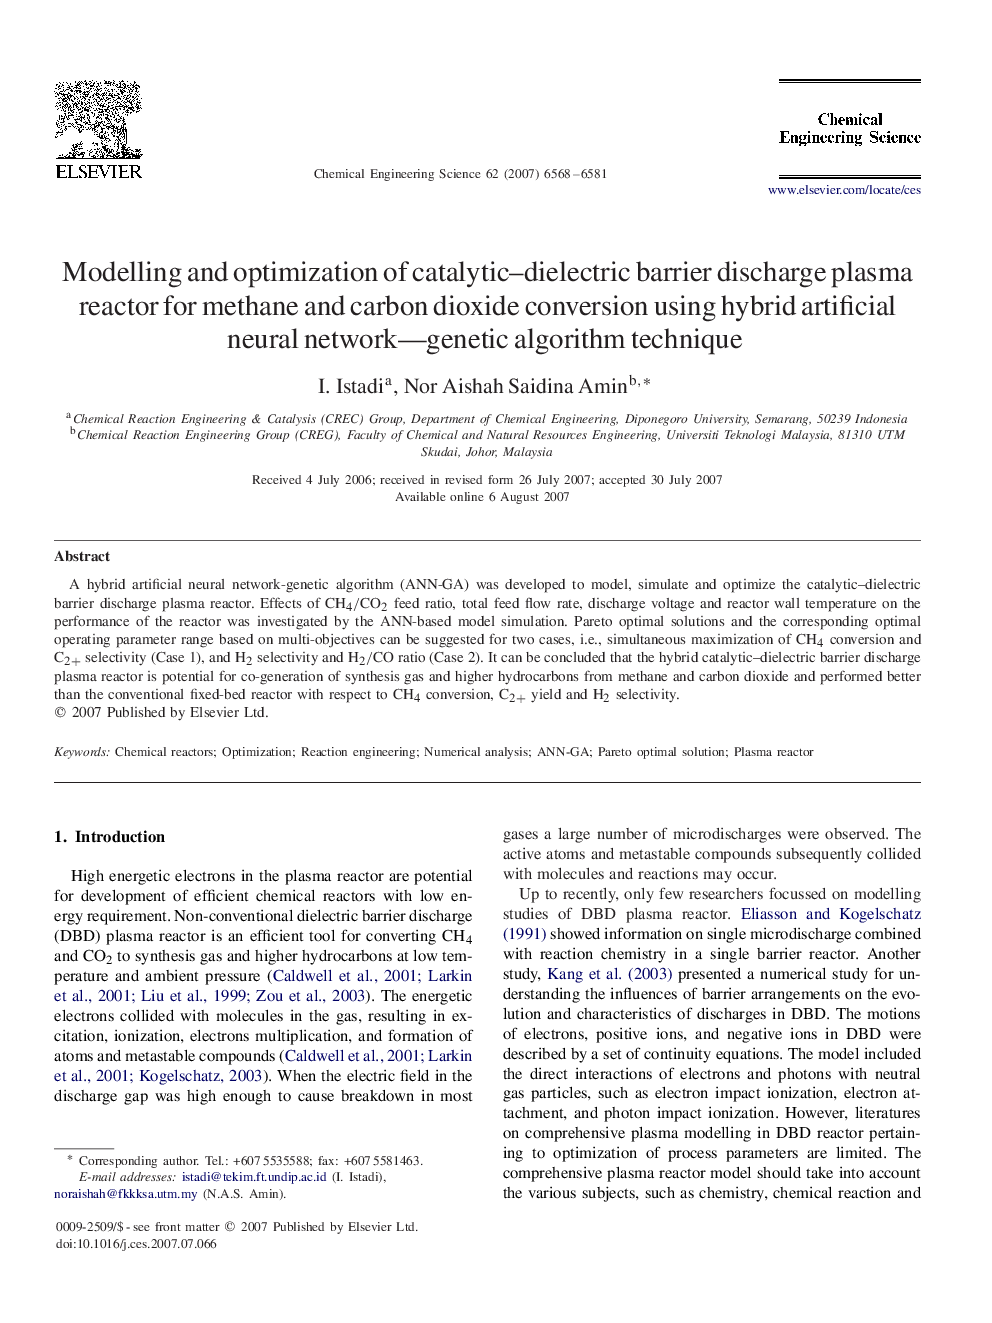 Modelling and optimization of catalytic–dielectric barrier discharge plasma reactor for methane and carbon dioxide conversion using hybrid artificial neural network—genetic algorithm technique